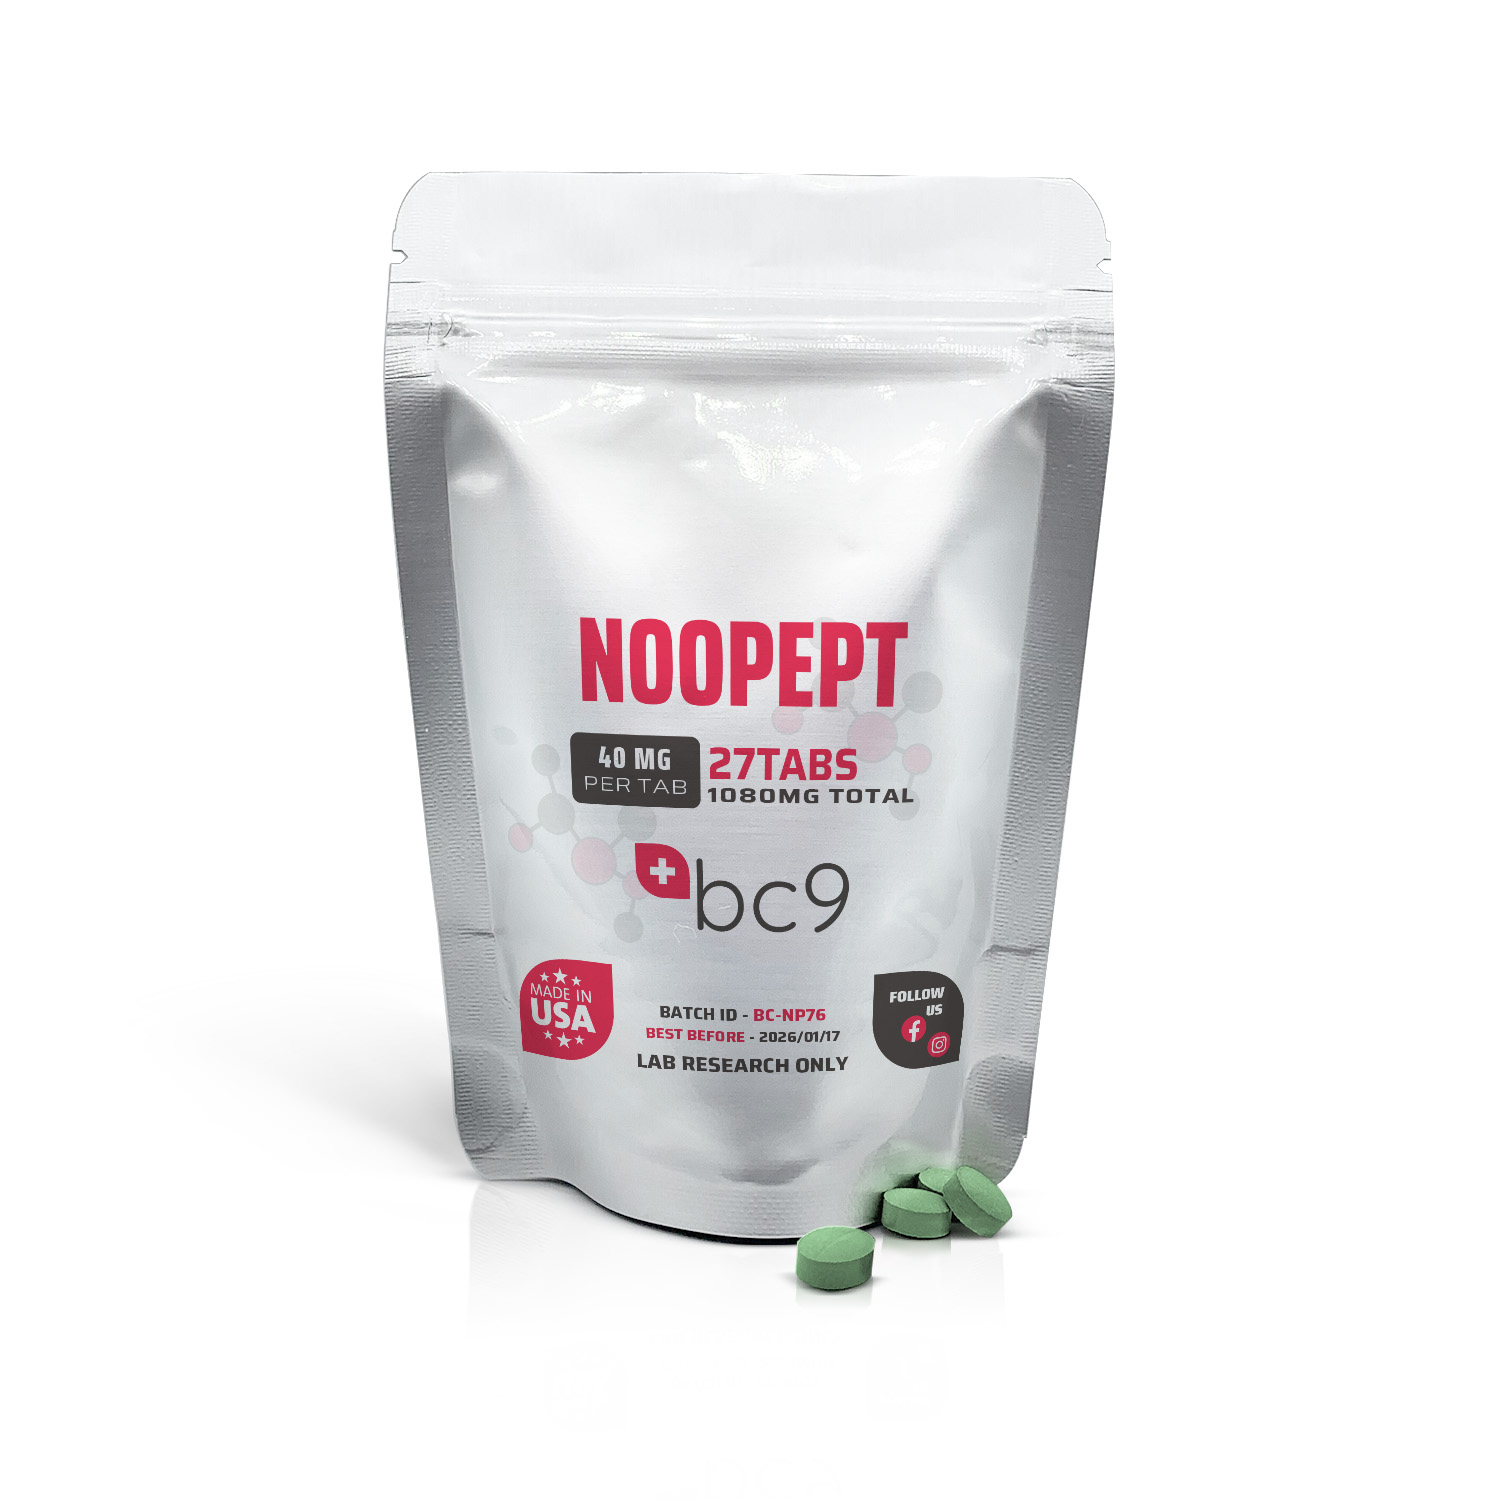 Noopept Tablets For Sale | Fast Shipping | BC9.org